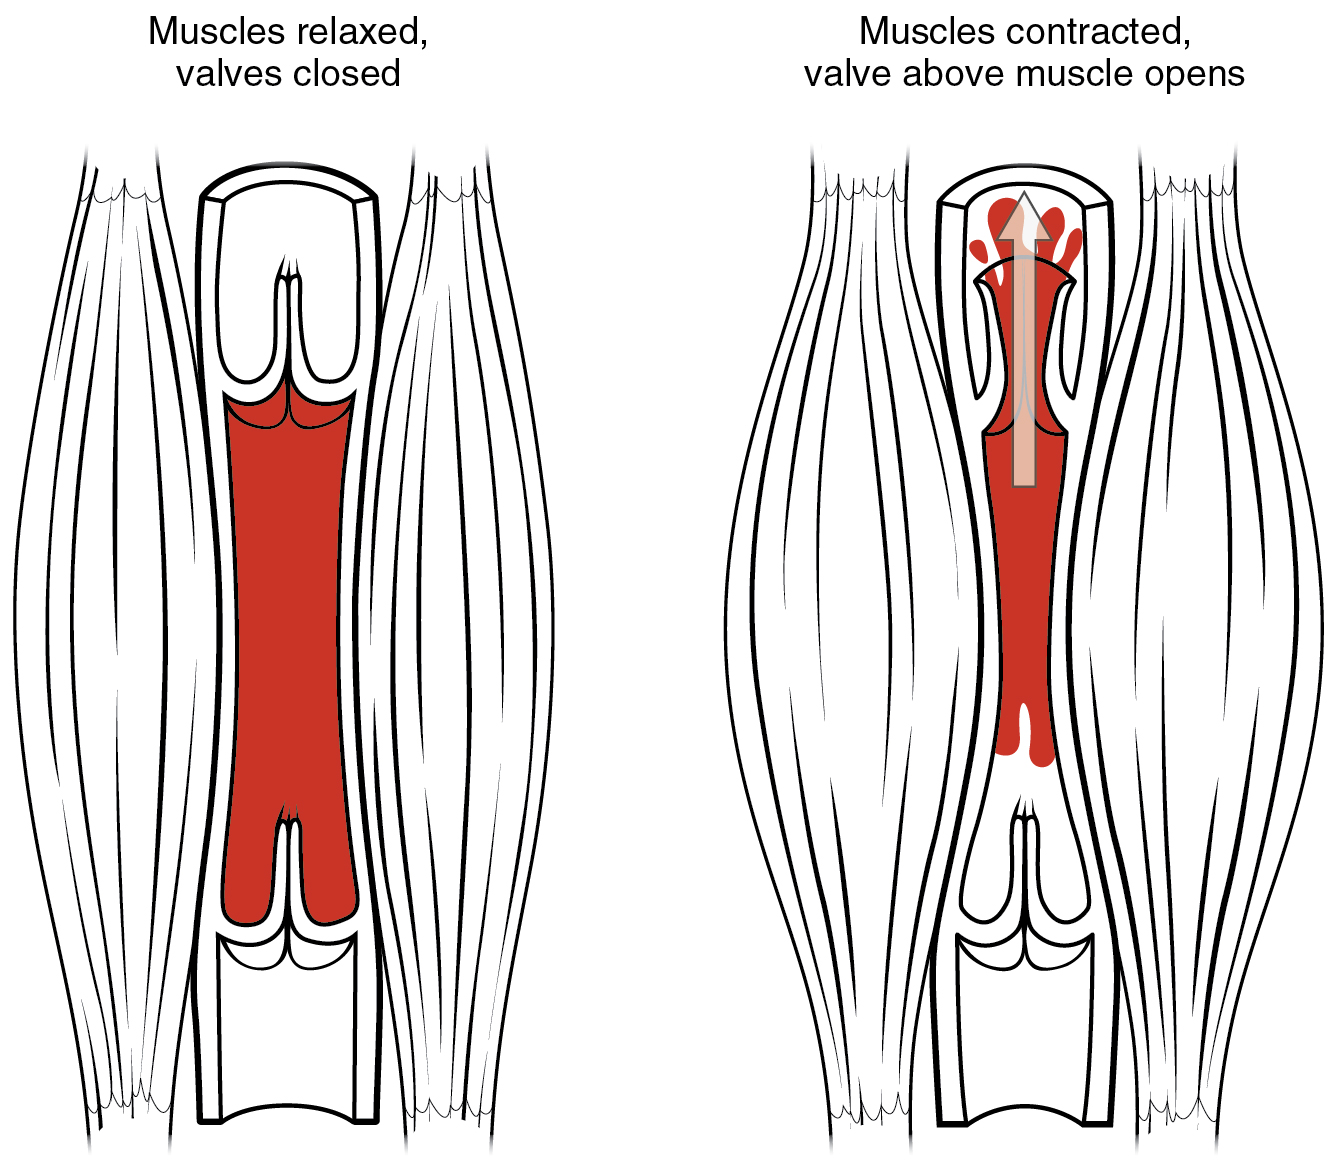 The left panel shows the structure of a skeletal muscle vein pump when the muscle is relaxed, and the right panel shows the structure of a skeletal muscle vein pump when the muscle is contracted.